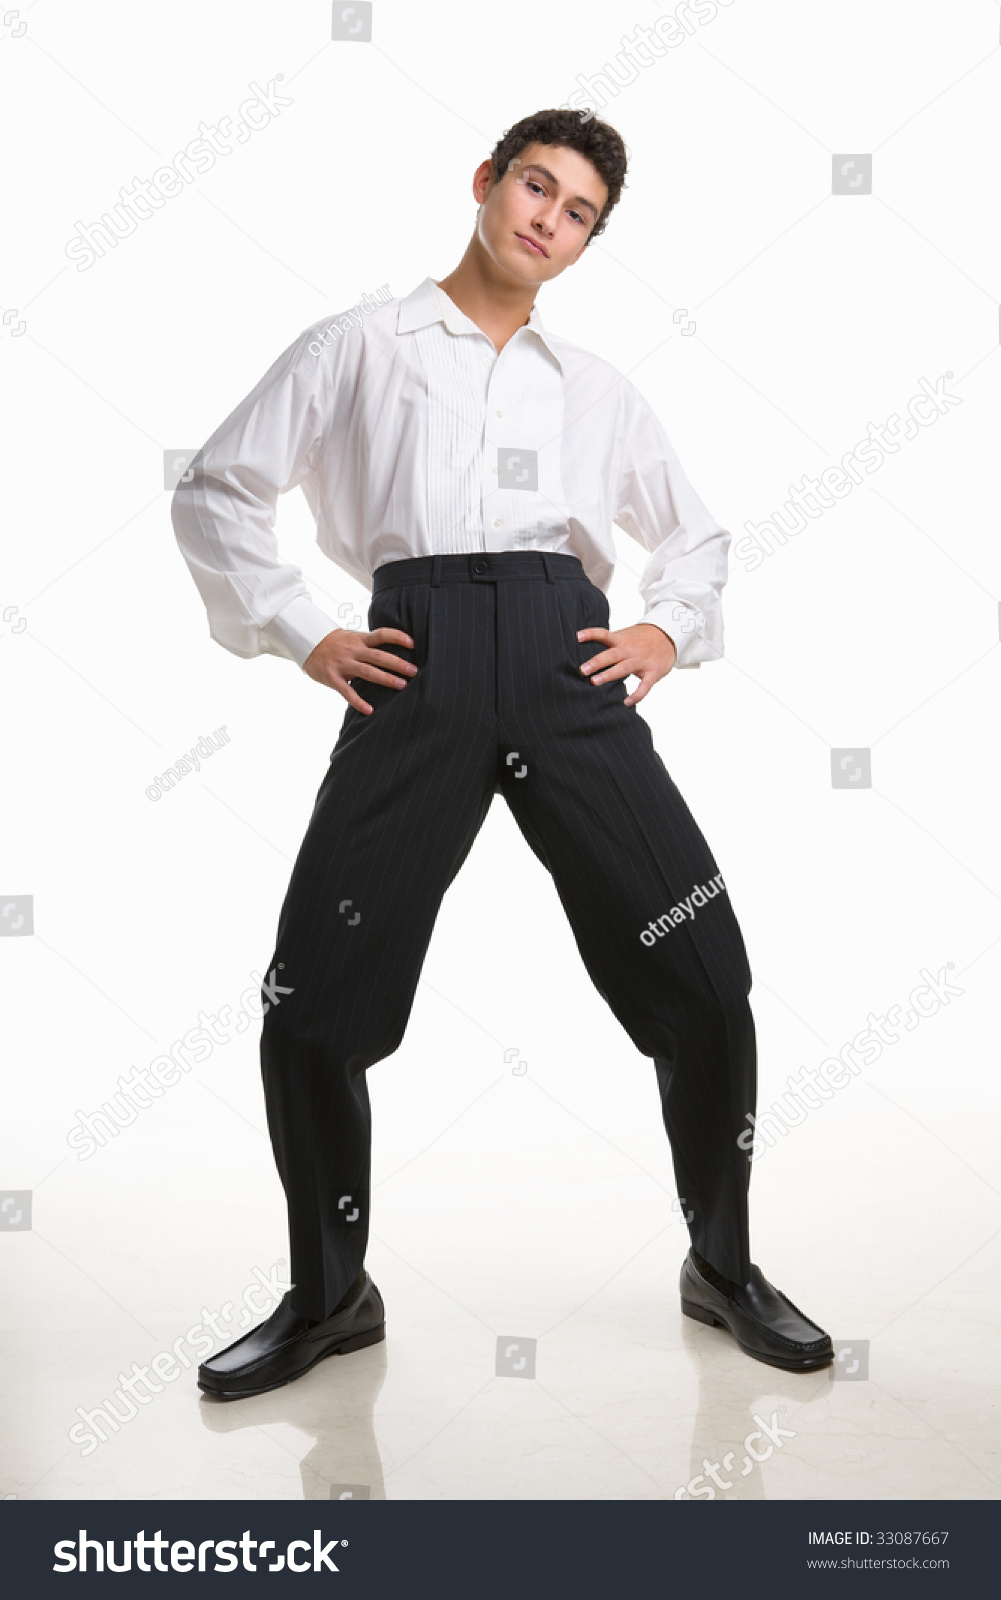 Funny Pose Of A Male Teenager Stock Photo 33087667 : Shutterstock